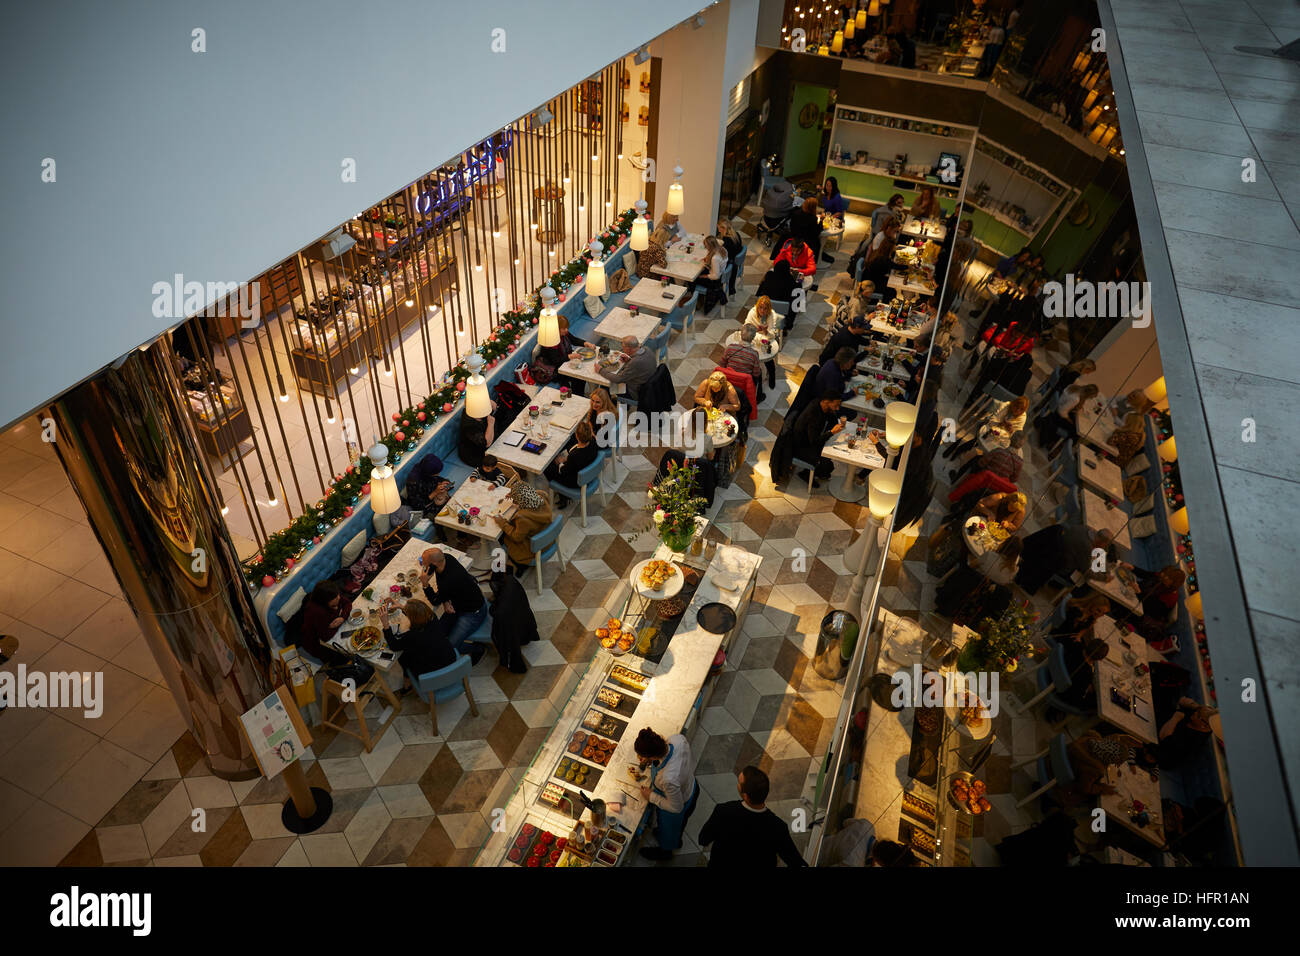 Manchester Selfridges restaurant interior   seating food much eating Elevated view high viewpoint above Ariel Restaurant dining food eating eating dri Stock Photo